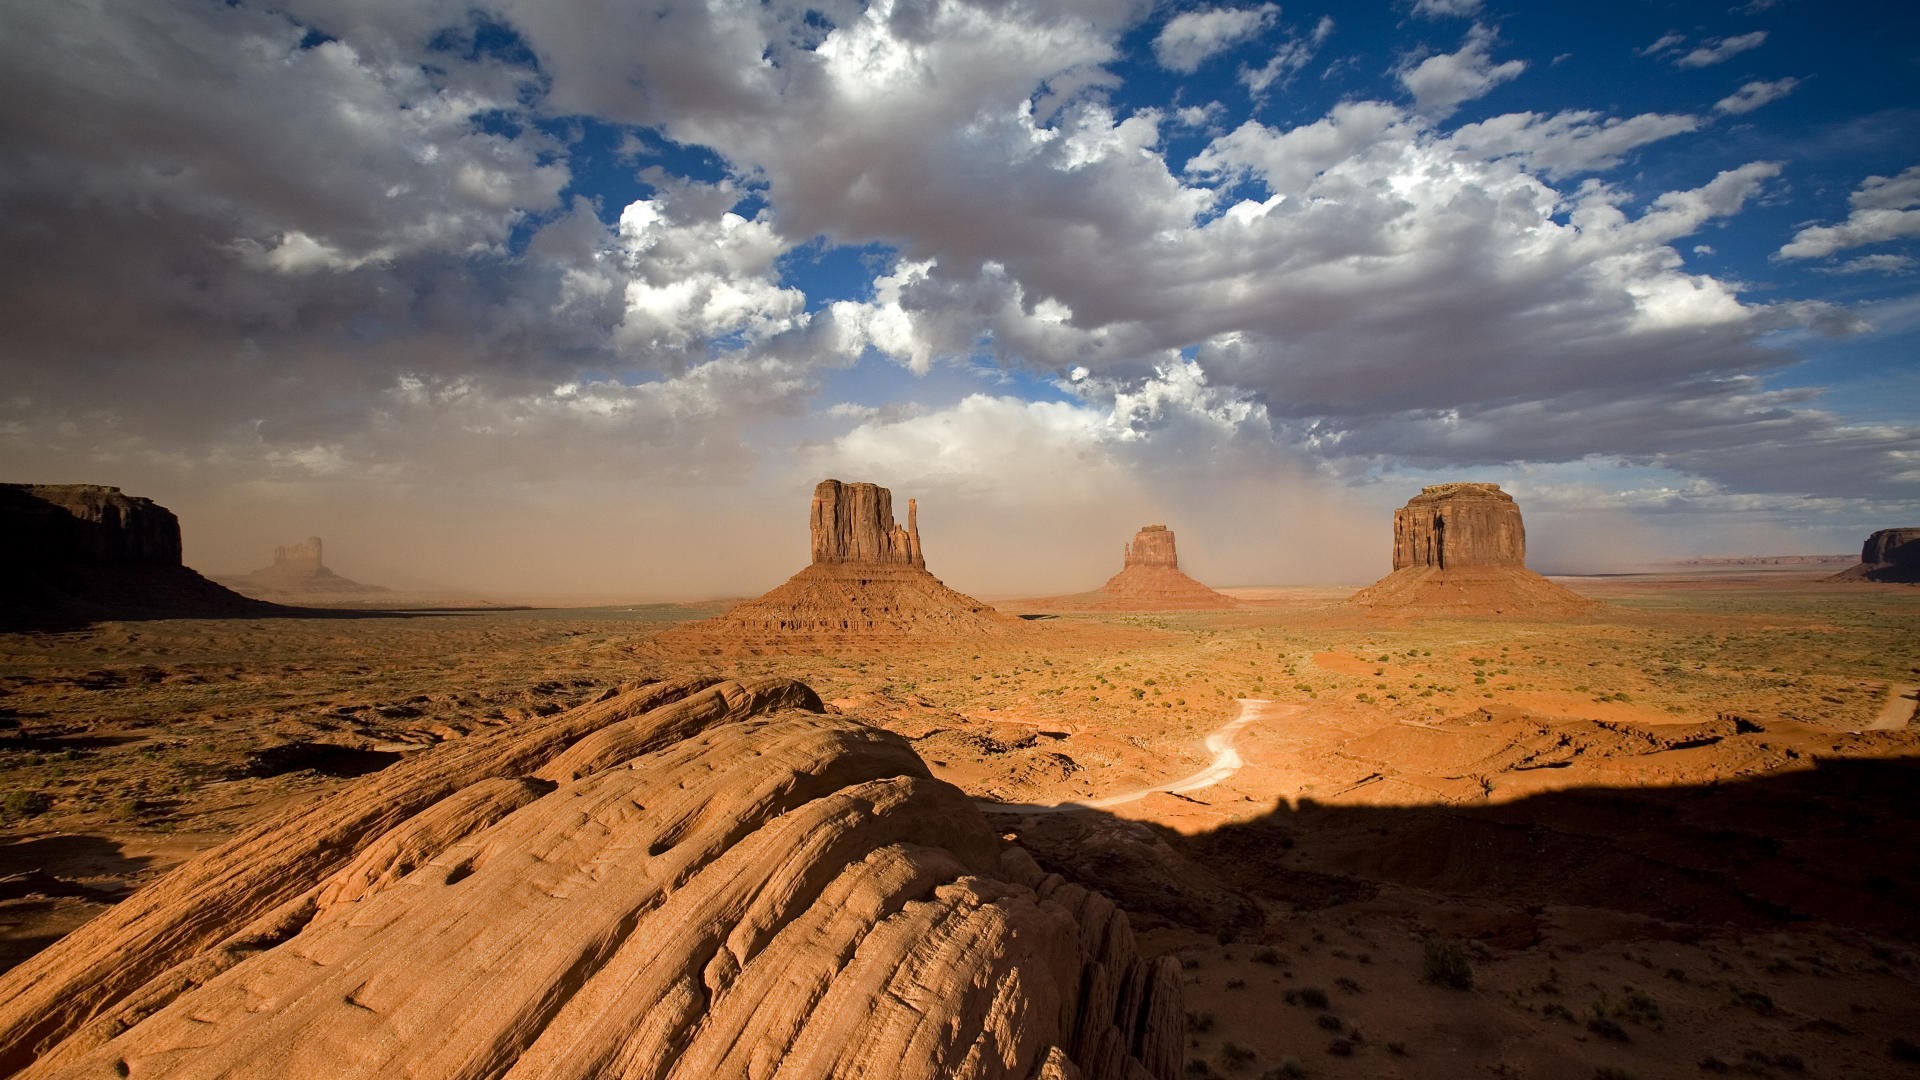 General 1920x1080 landscape rocks mountains desert nature Monument Valley road rock formation clouds sky